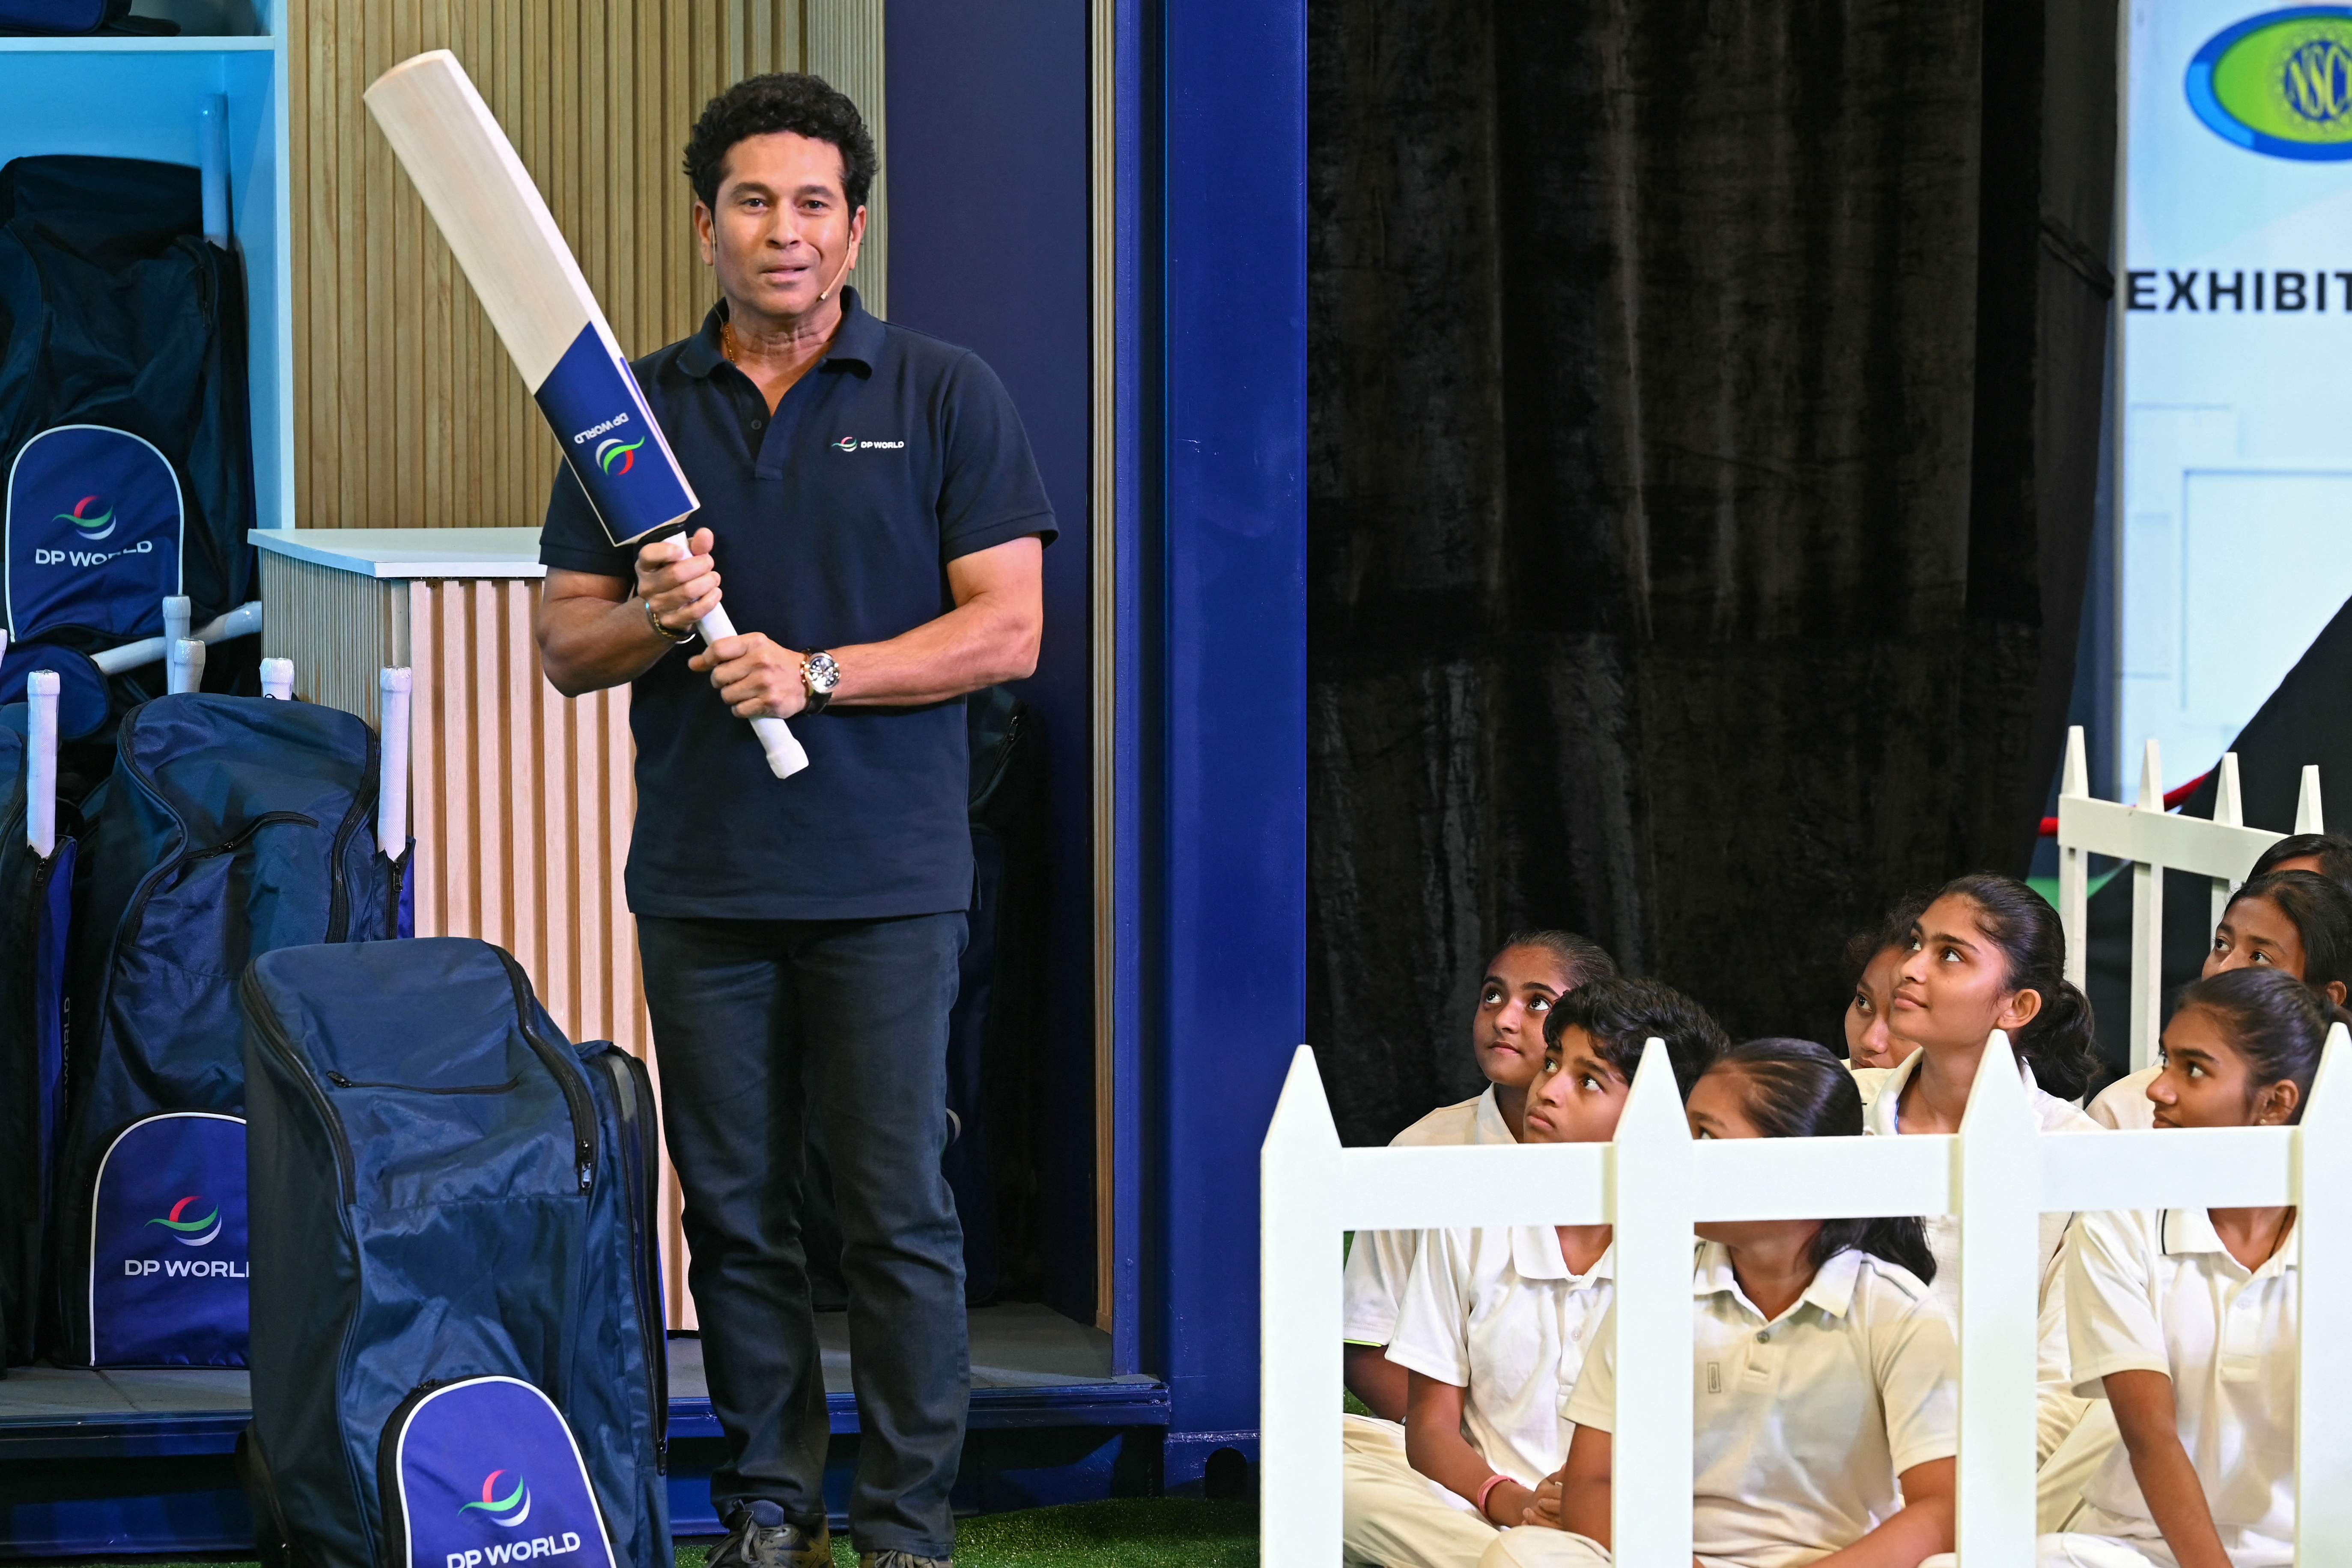 India legend Sachin Tendulkar appears at an event in Mumbai on 4 October on the eve of the Cricket World Cup, where he is a global ambassador